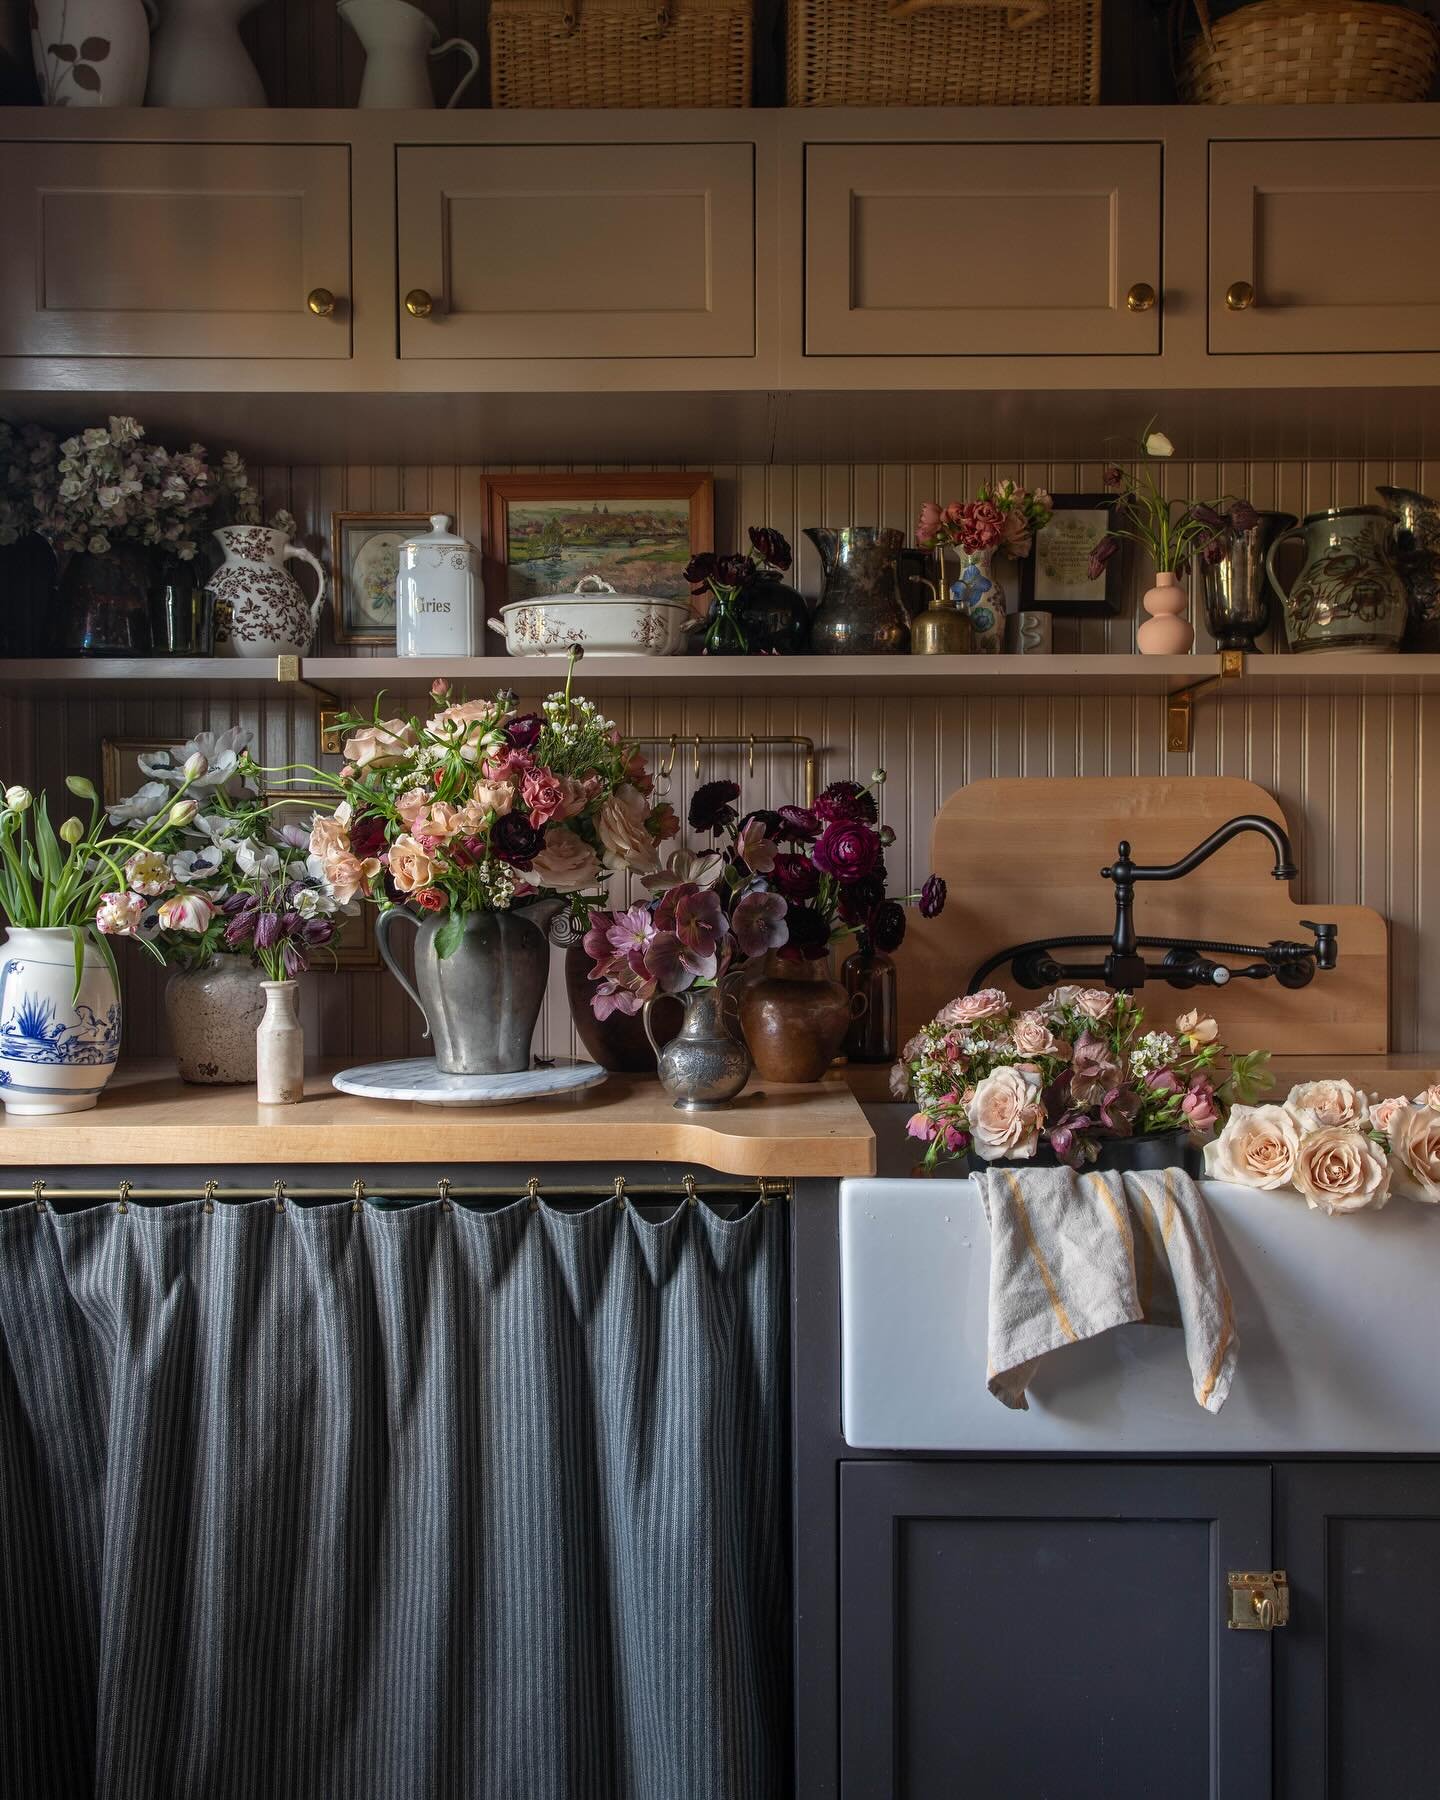 We wrapped up a photoshoot over the weekend of a really special project that I can&rsquo;t wait to share! These are some of the arrangements we made for the shoot. No better place to show them together than in our scullery, a room made for flower arr